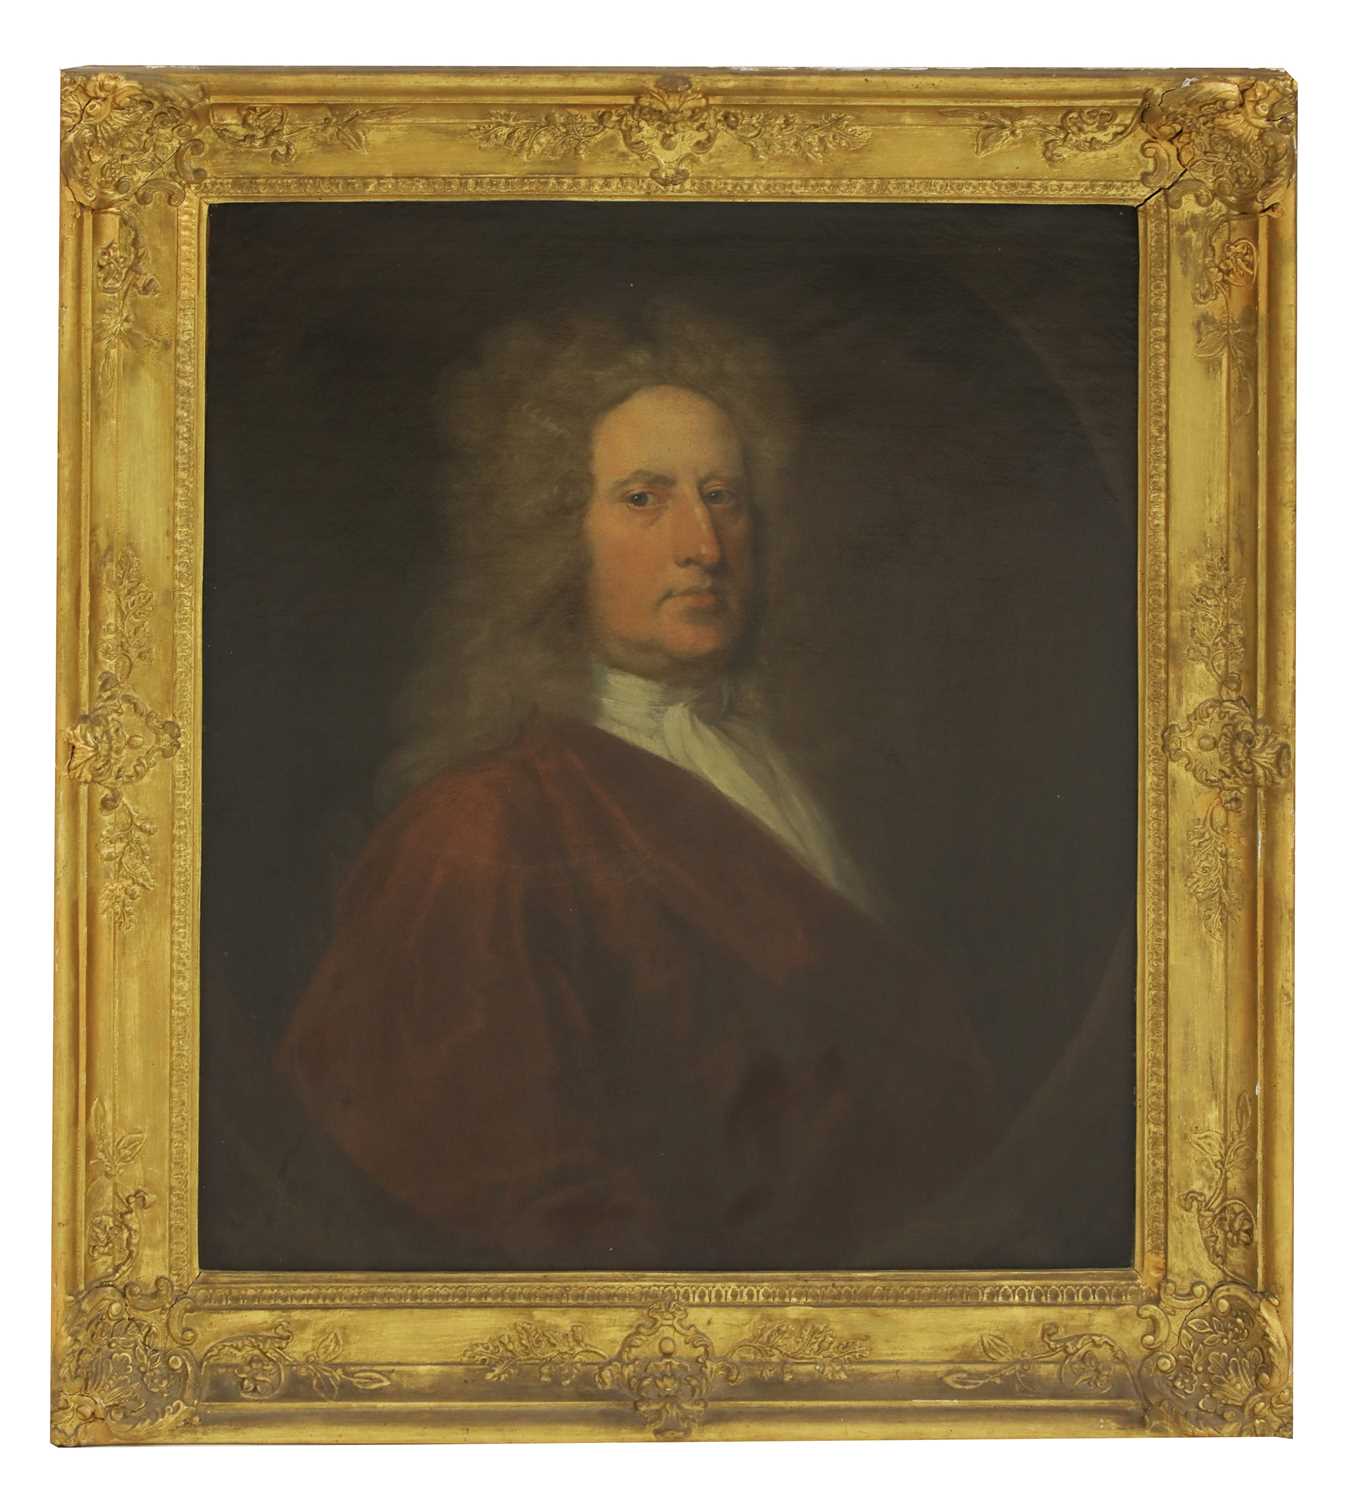 Lot 309 - Attributed to William Aikman (1682-1731)